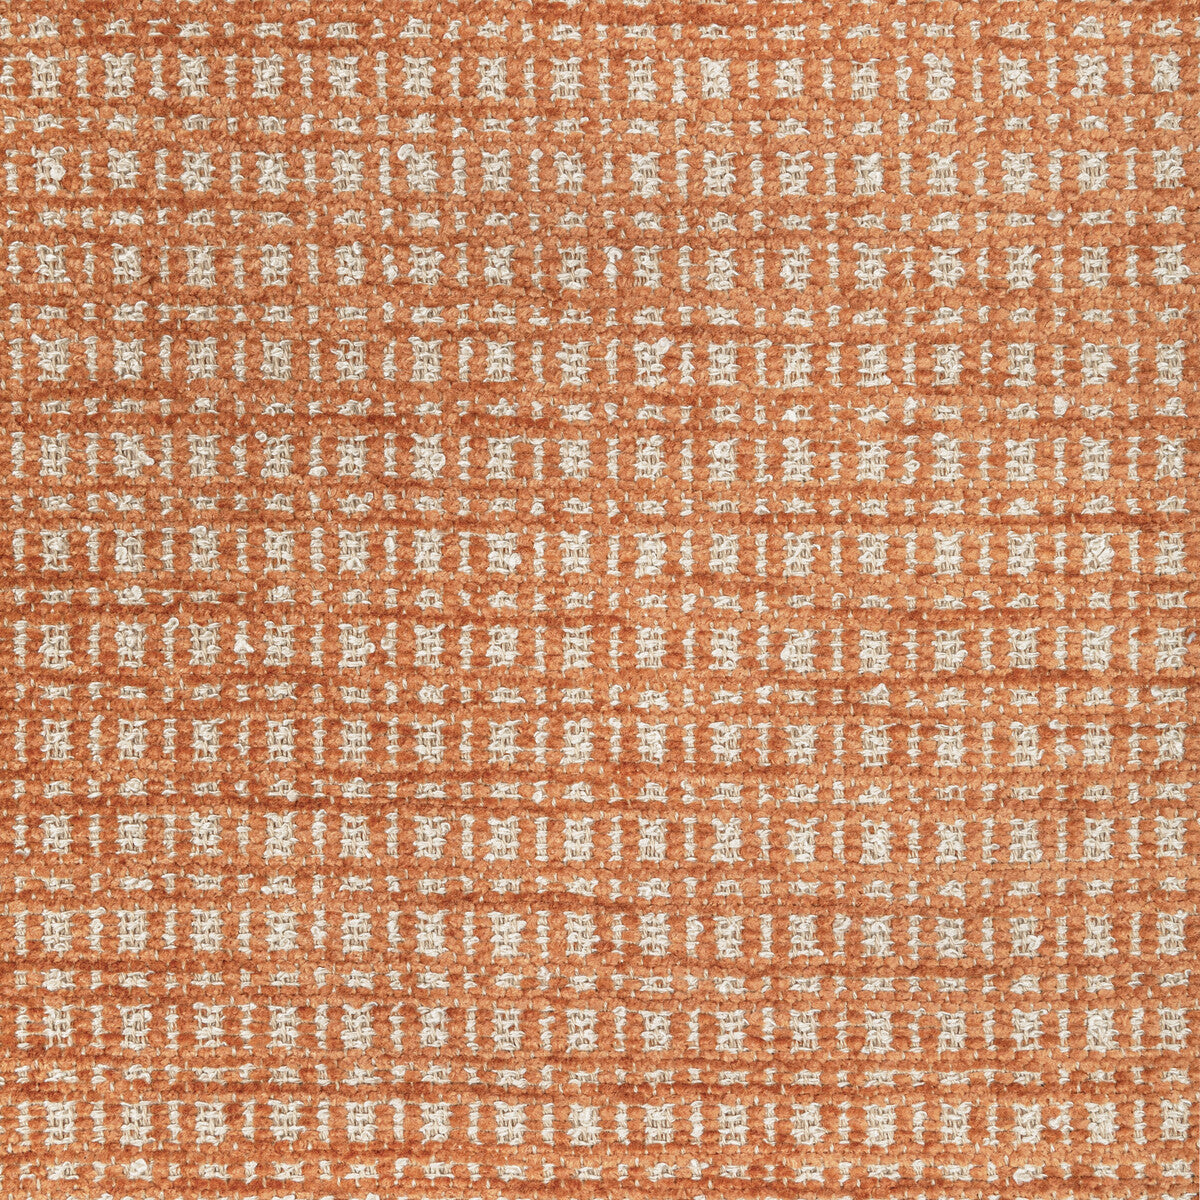 Landiers Texture fabric in orange color - pattern 8022123.12.0 - by Brunschwig &amp; Fils in the Chambery Textures III collection